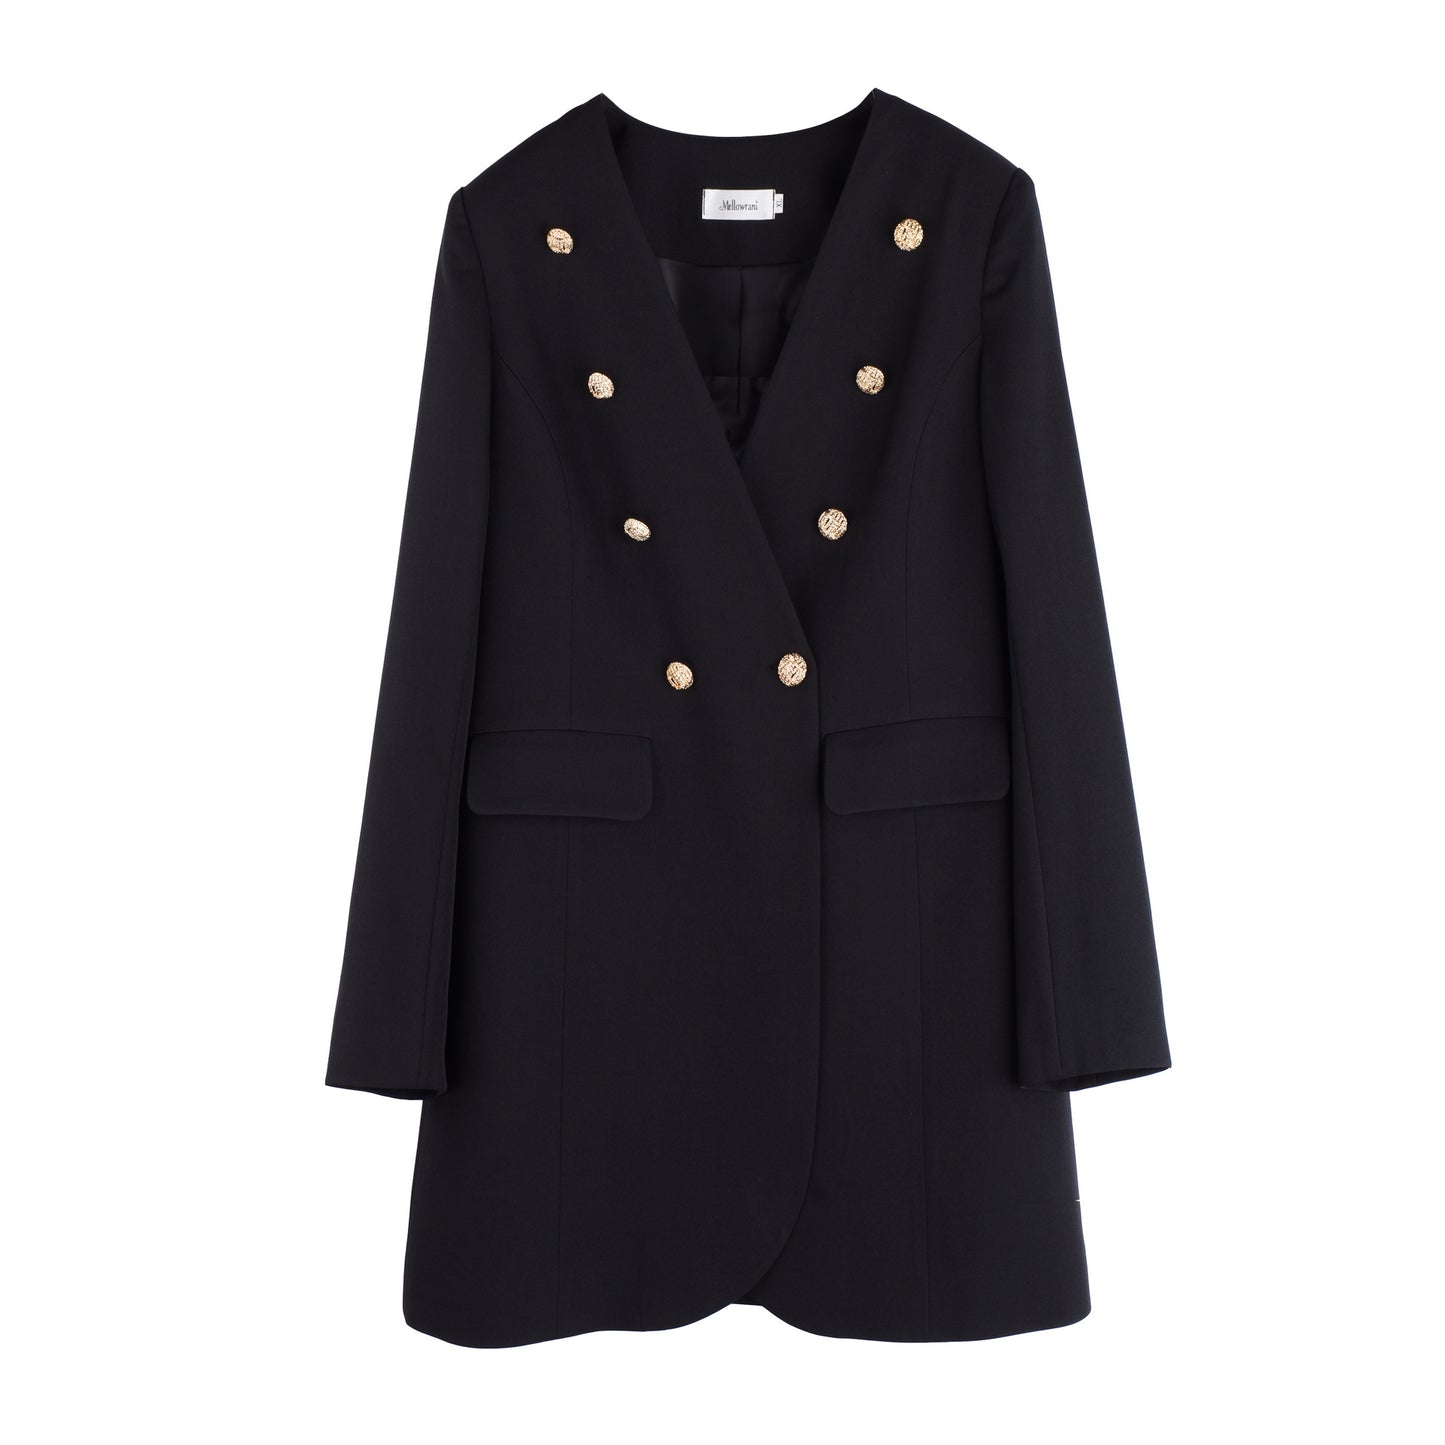 Autumn Large Size Women's Collarless Double-breasted Suit Jacket